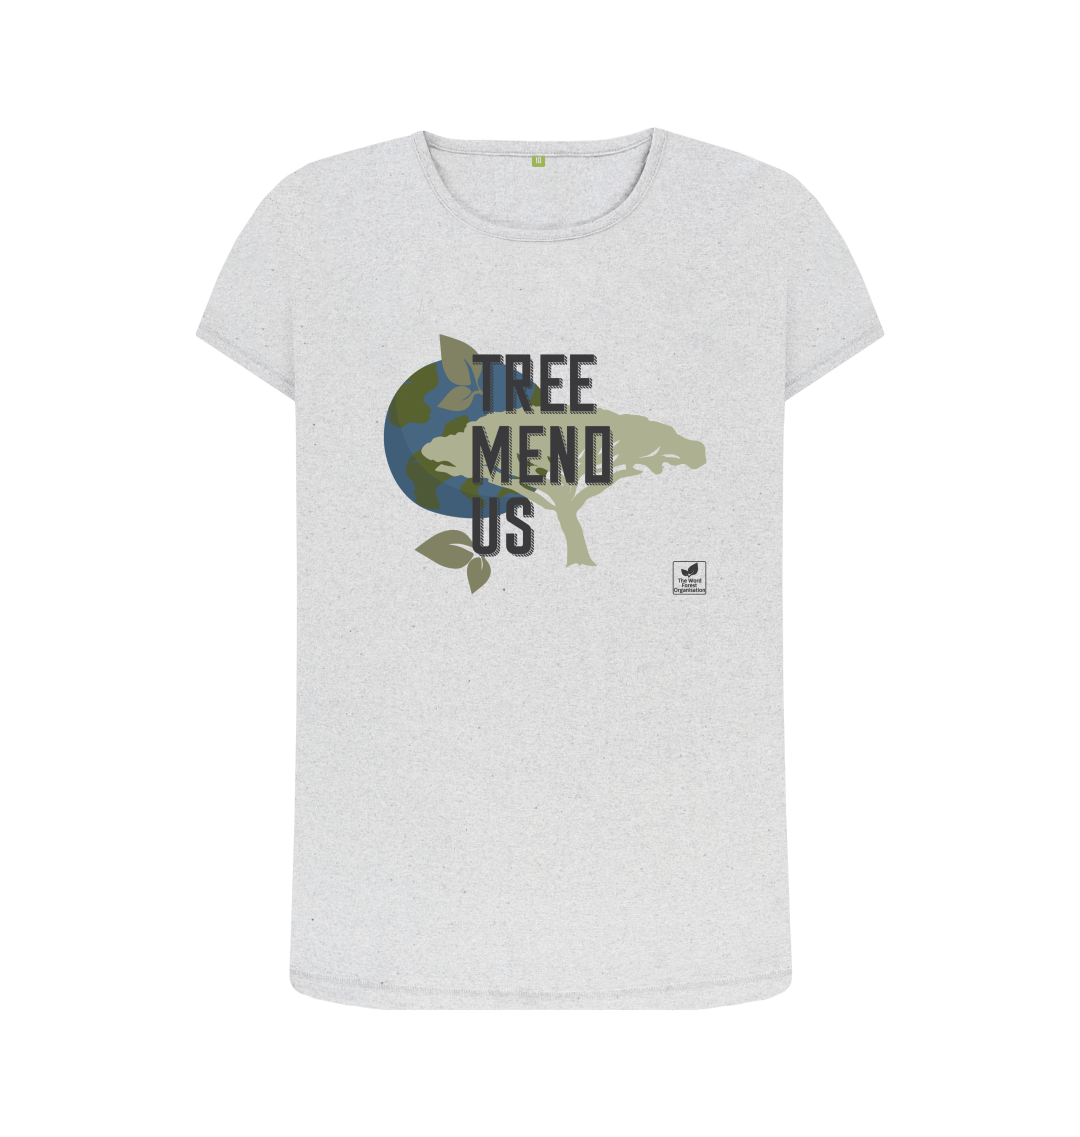 Remill organic cotton, vegan friendly tee-shirt from The Word Forest Organisation